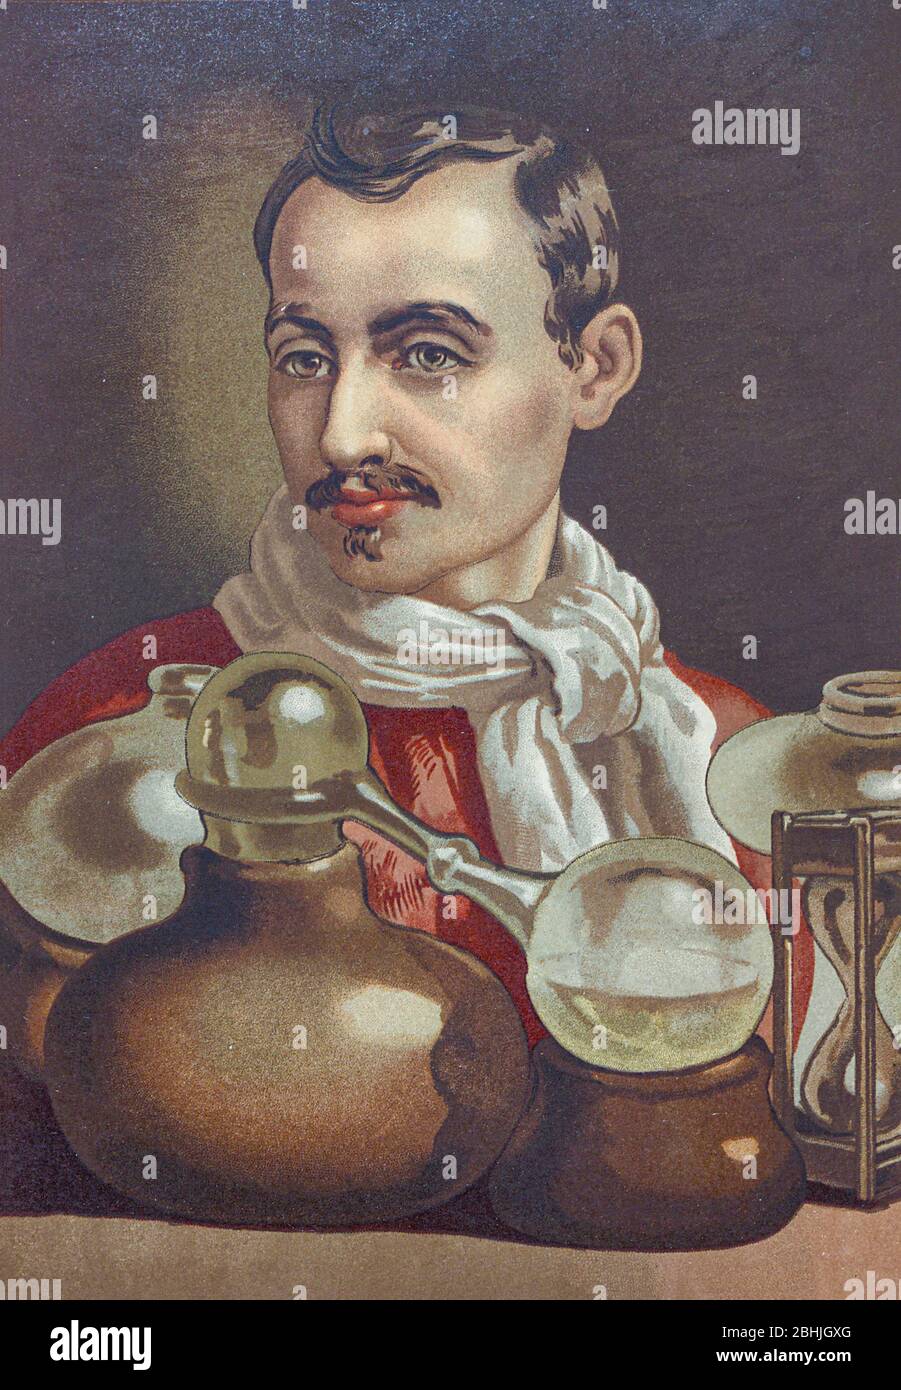 Jan Baptist van Helmont (12 January 1580 – 30 December 1644) was a chemist, physiologist, and physician from the Spanish Netherlands. He worked during the years just after Paracelsus and the rise of iatrochemistry, and is sometimes considered to be 'the founder of pneumatic chemistry'. Van Helmont is remembered today largely for his ideas on spontaneous generation, his 5-year willow tree experiment, and his introduction of the word 'gas' (from the Greek word chaos) into the vocabulary of science. From the book La ciencia y sus hombres : vidas de los sabios ilustres desde la antigüedad hasta el Stock Photo